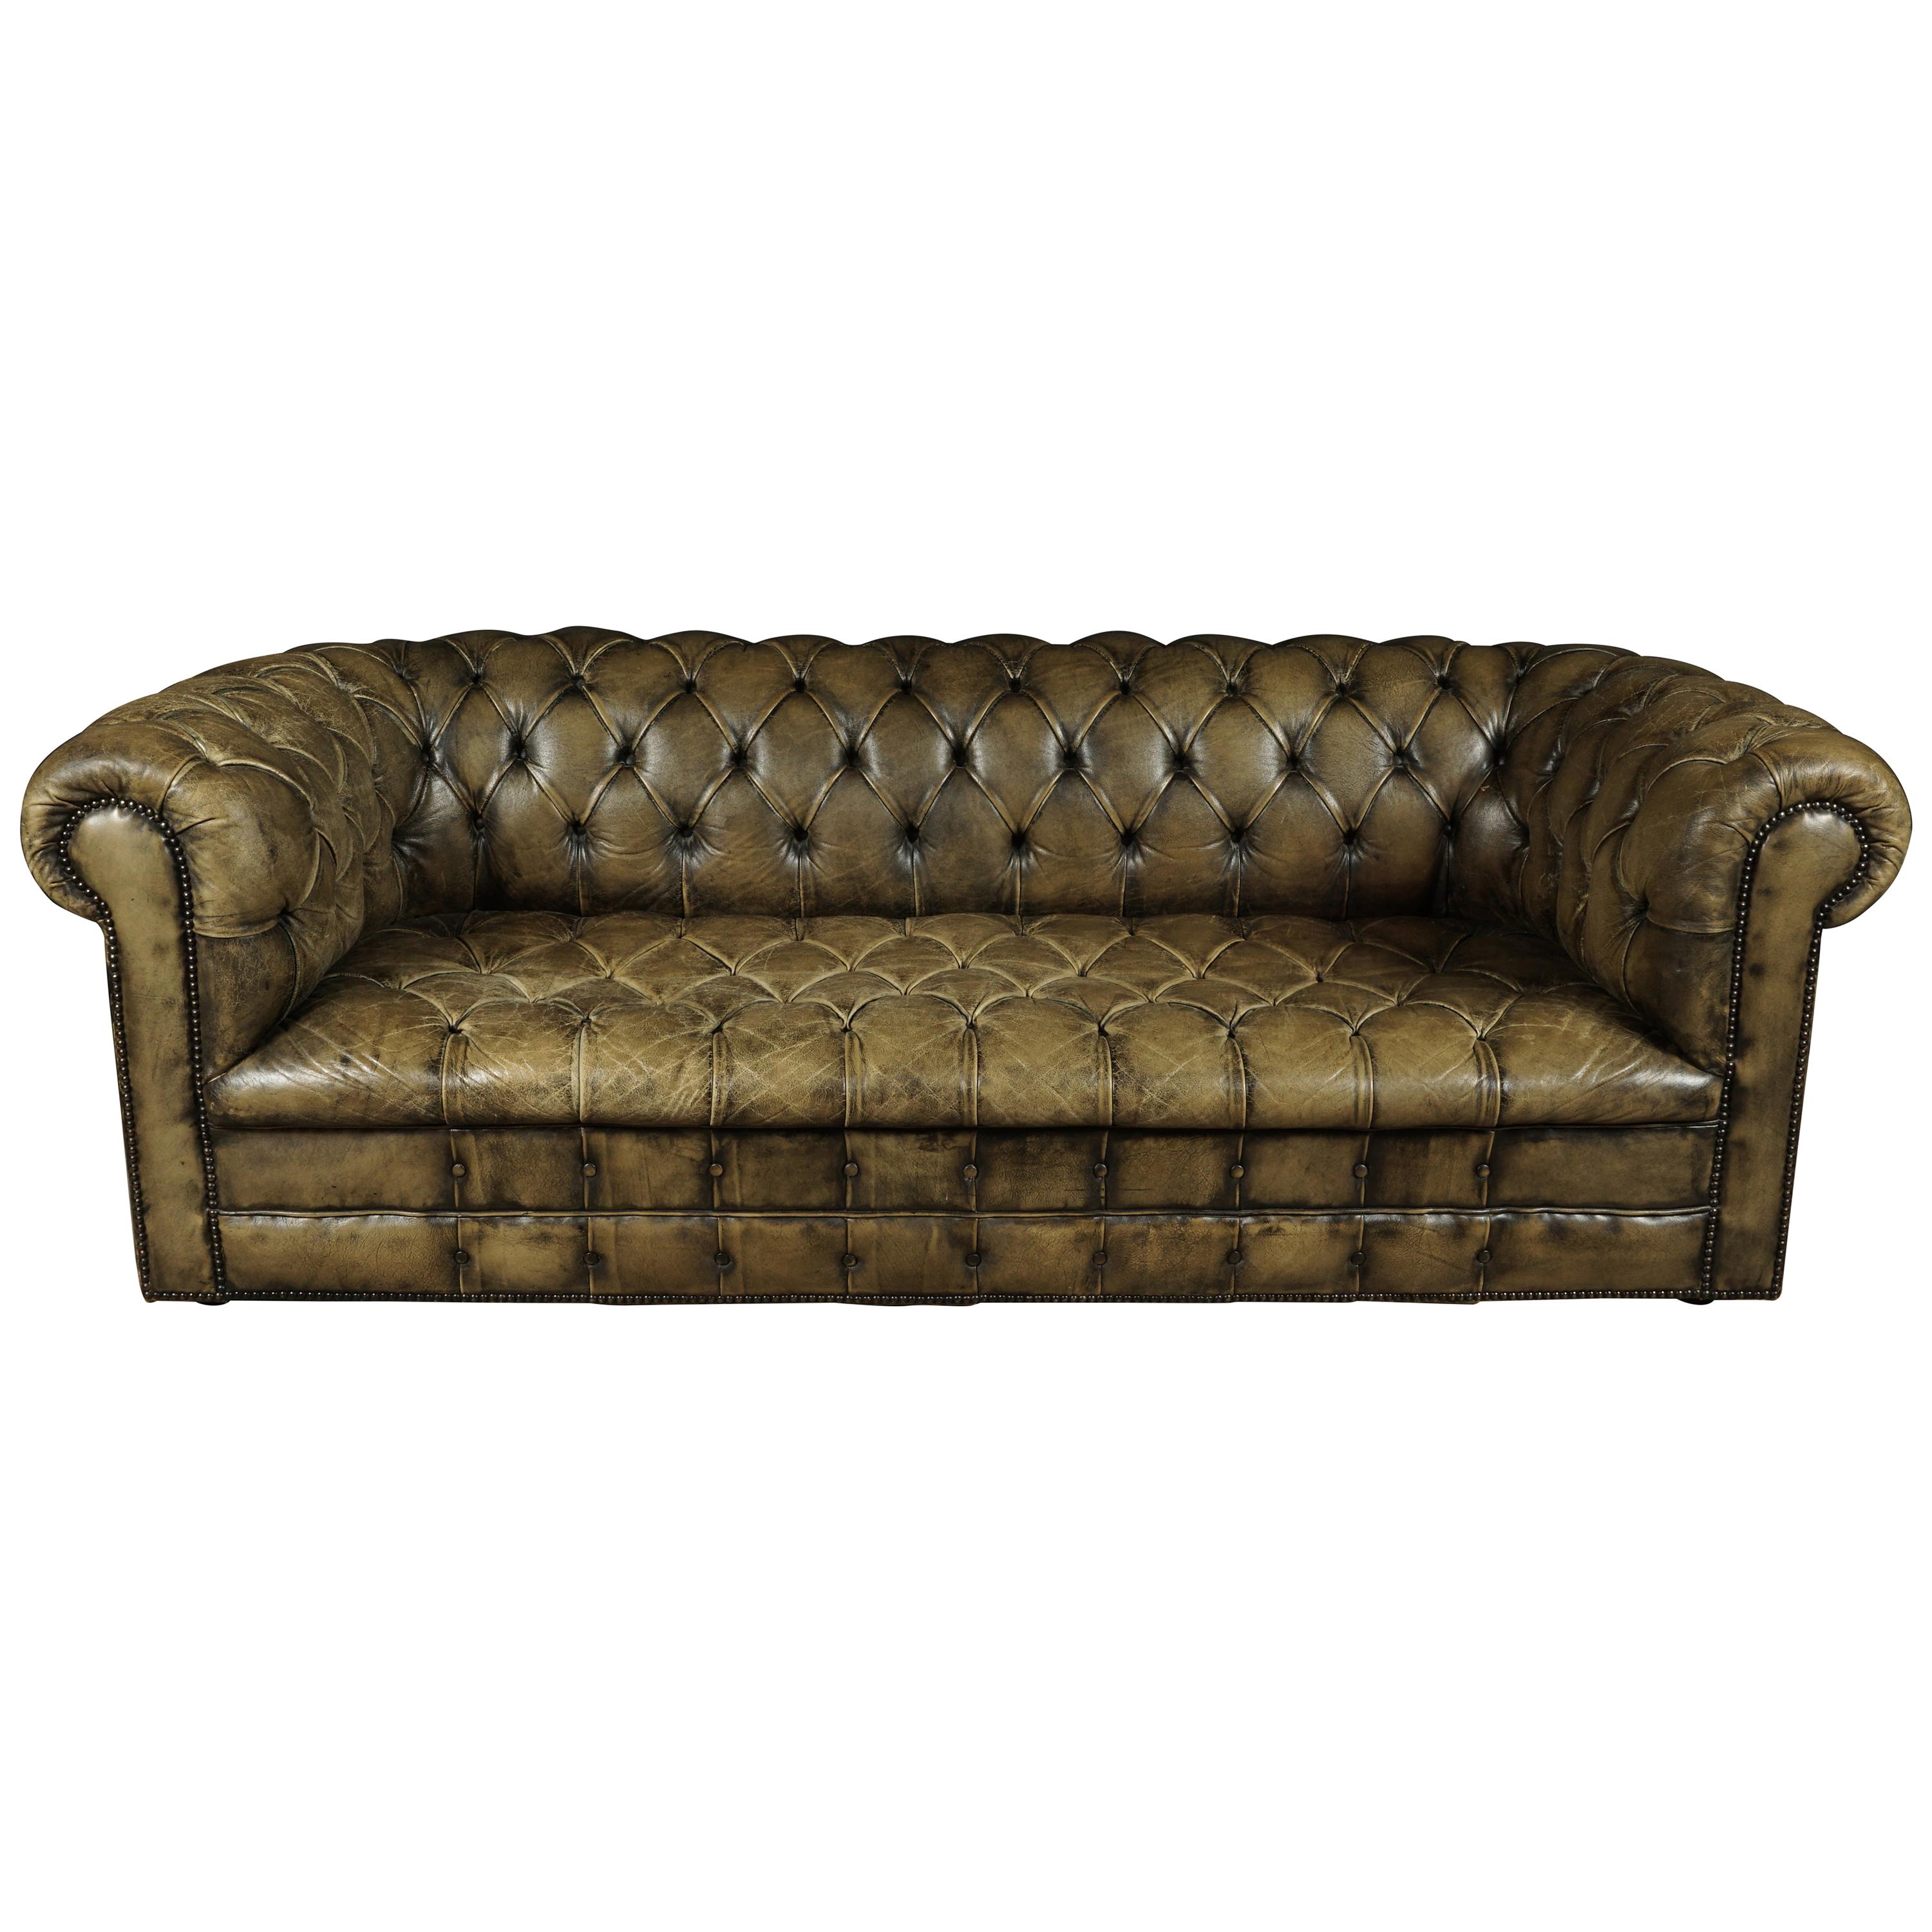 Vintage Chesterfield Sofa from England, circa 1950